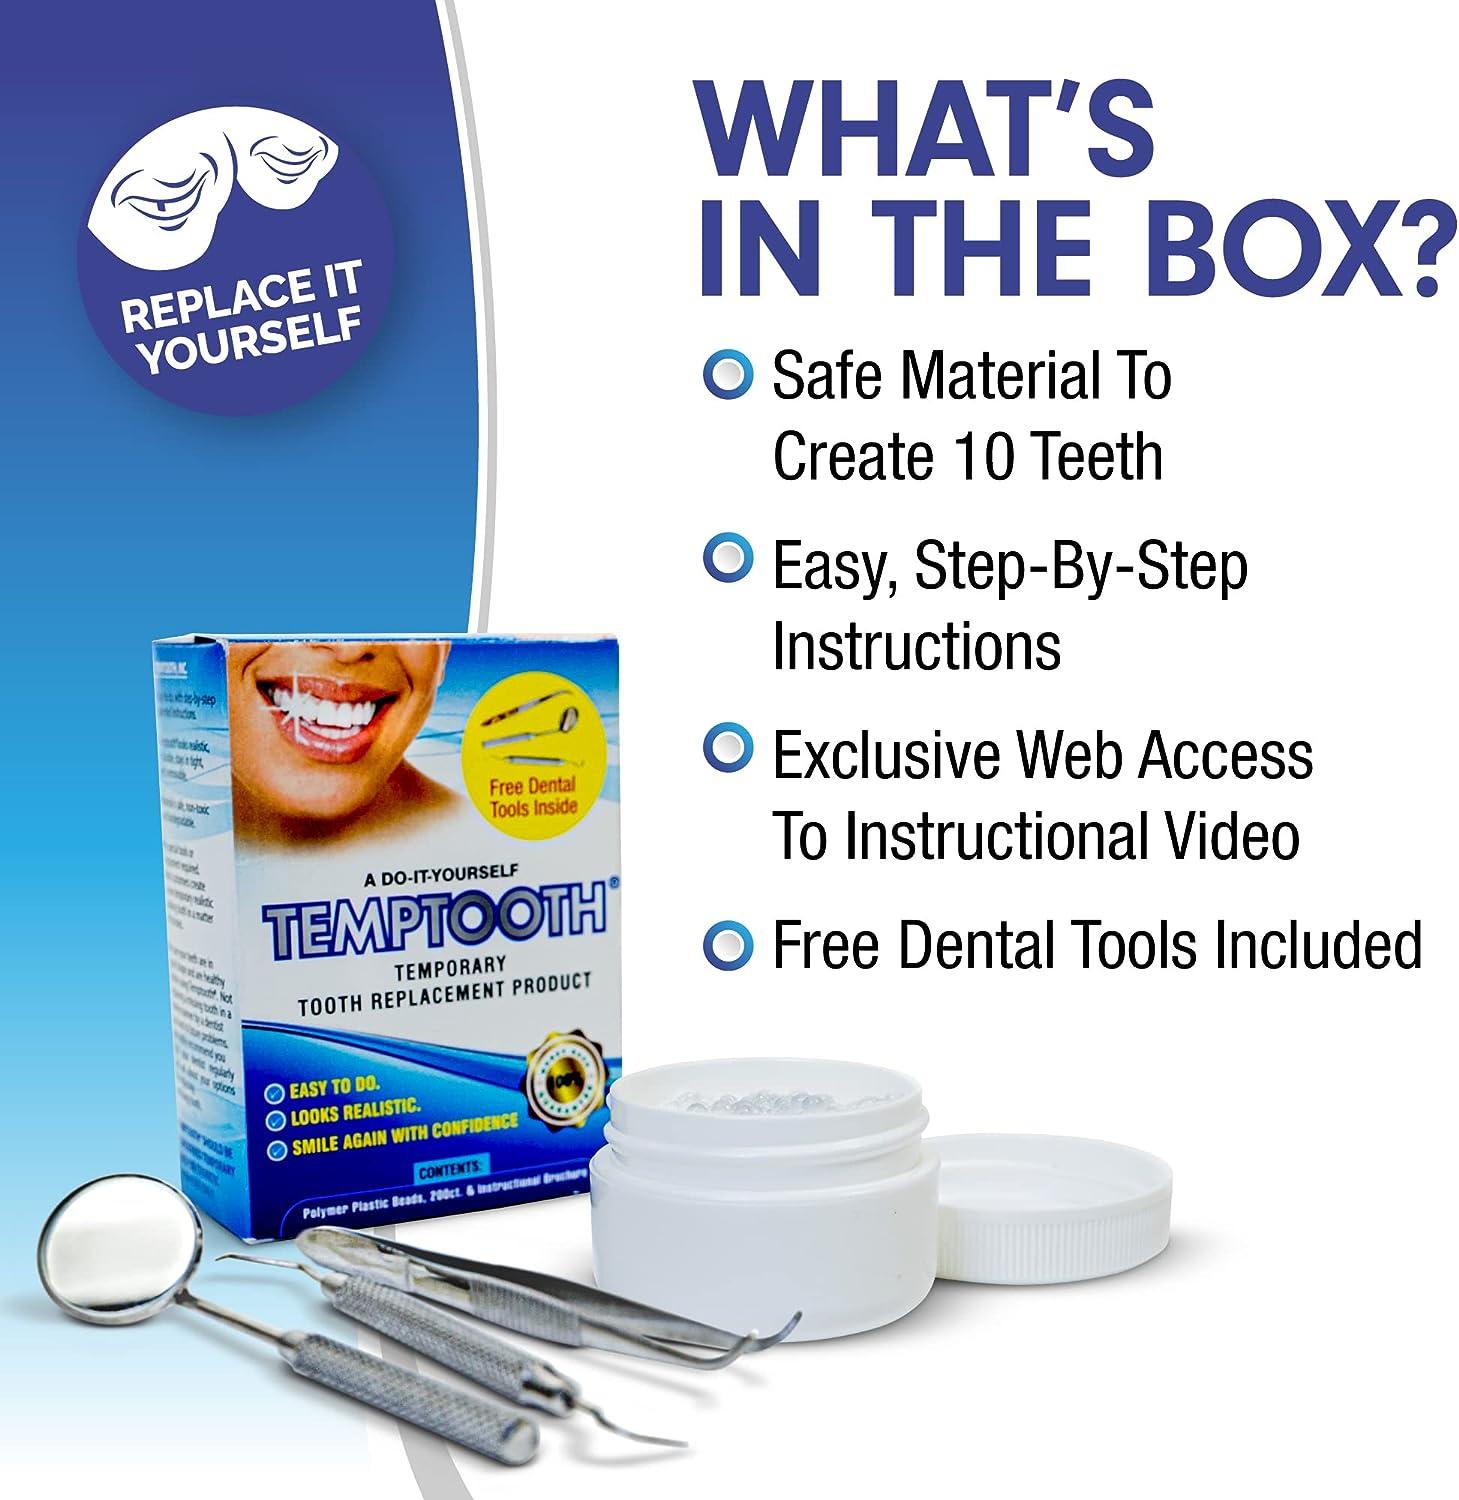 Temporary Tooth Double Kit (Save $10.80)